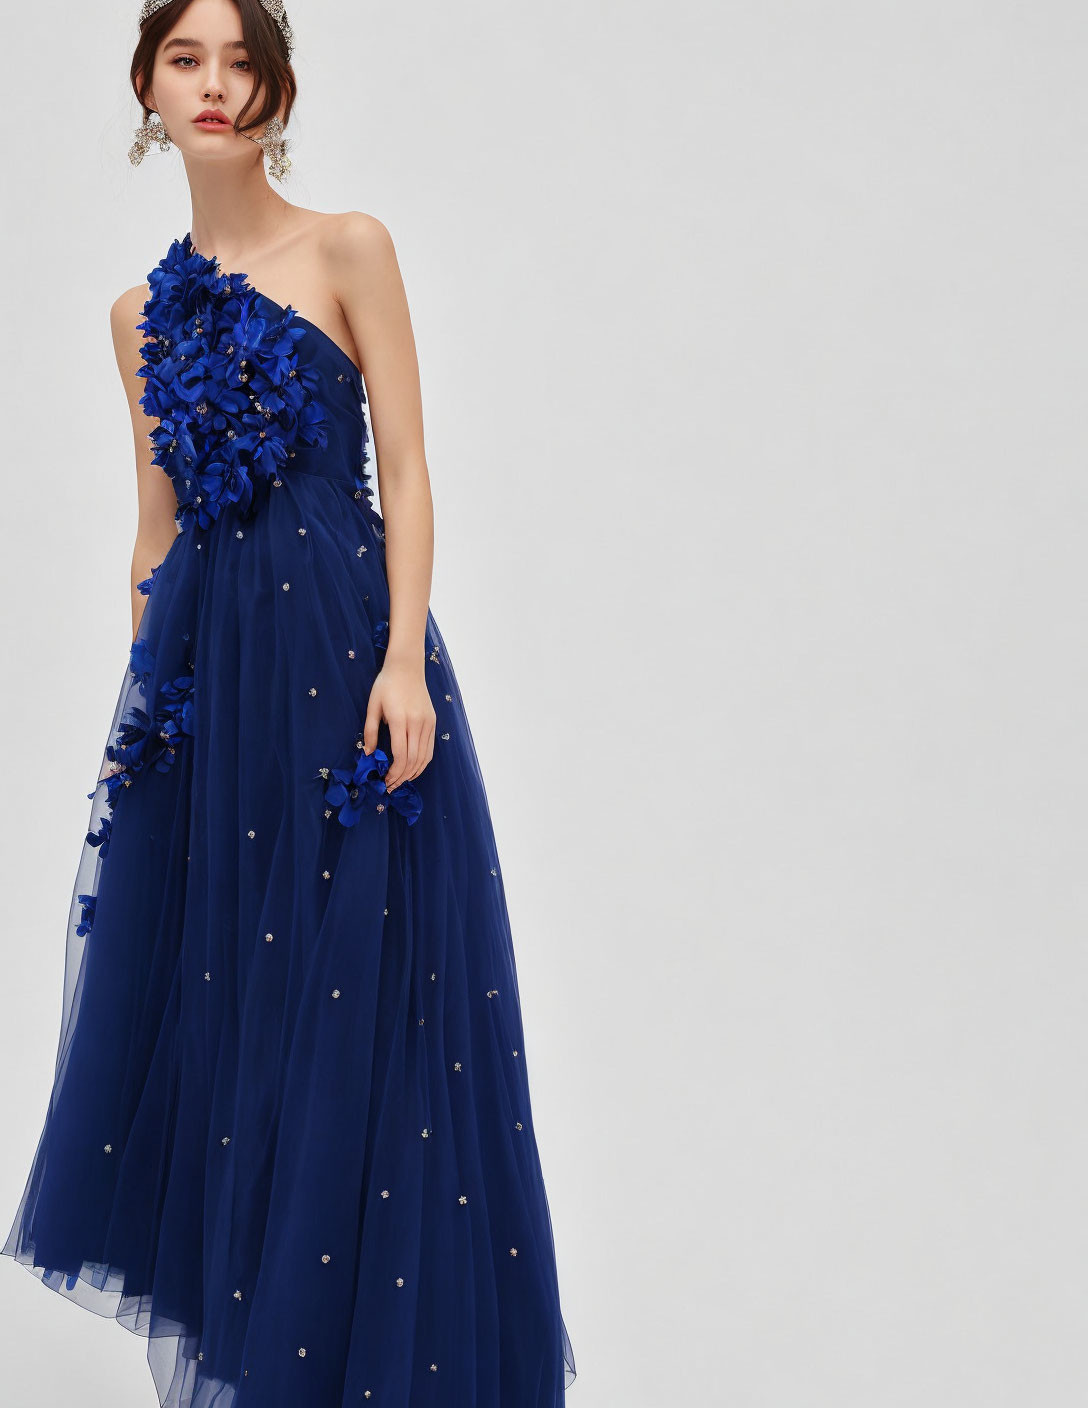 Woman in one-shoulder blue gown with floral embellishments on sheer skirt